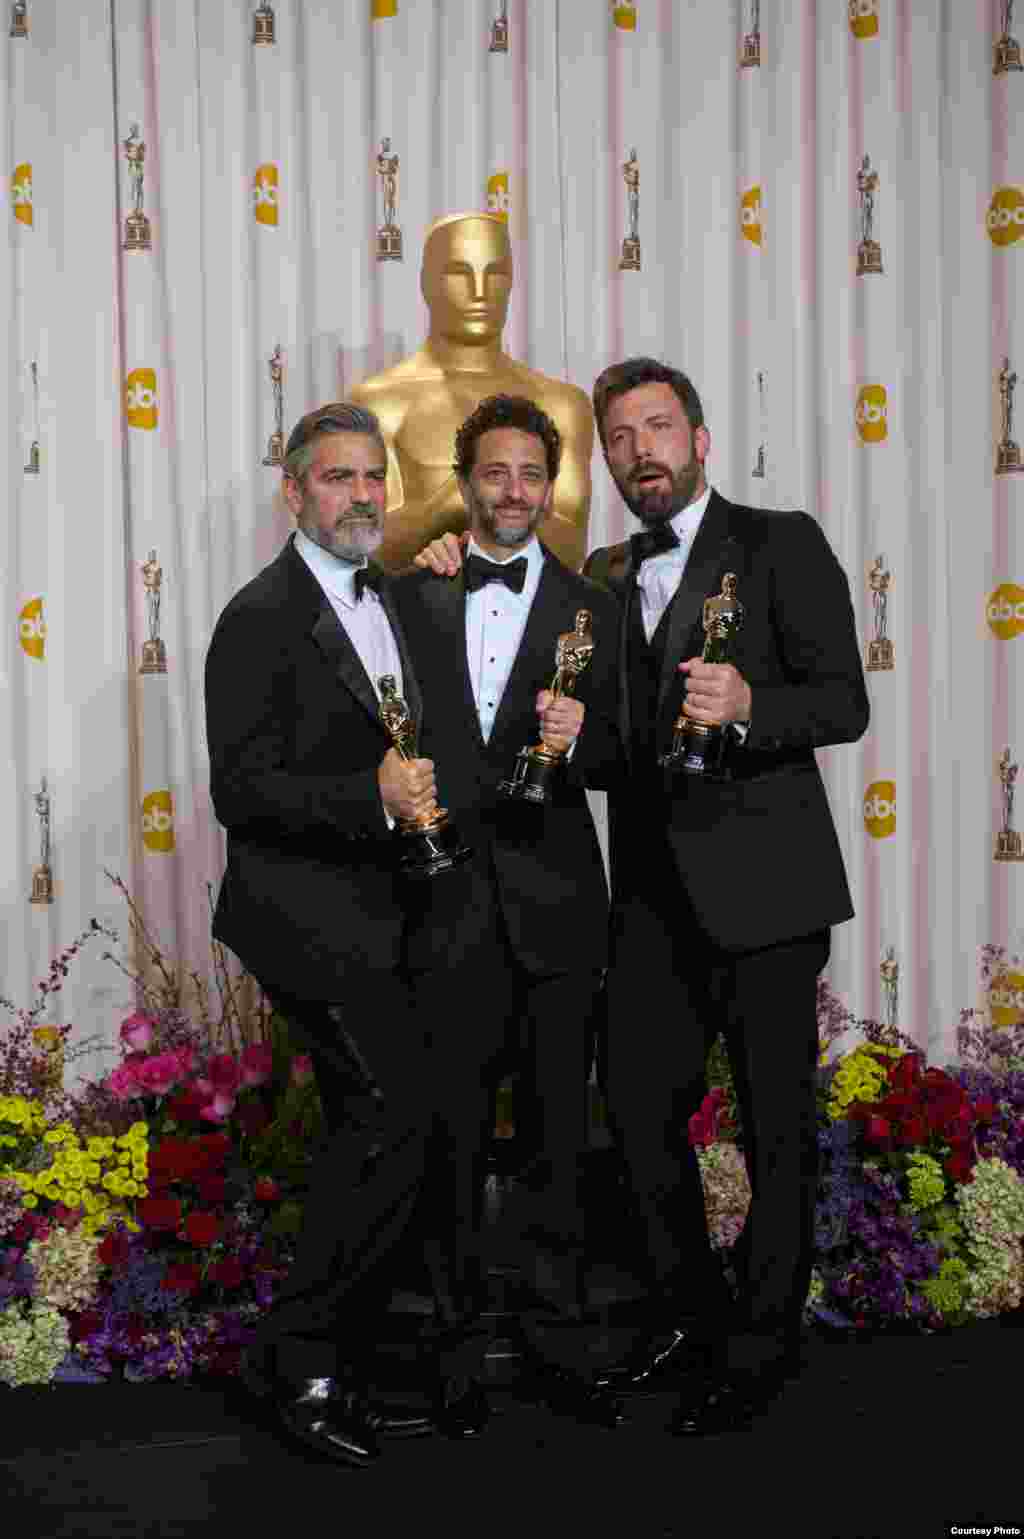 Producers George Clooney, Grant Heslov and Ben Affleck pose for the press after winning the Oscar® for best motion picture of the year for “Argo”, Feb. 24, 2013. (Photo: AMPAS)